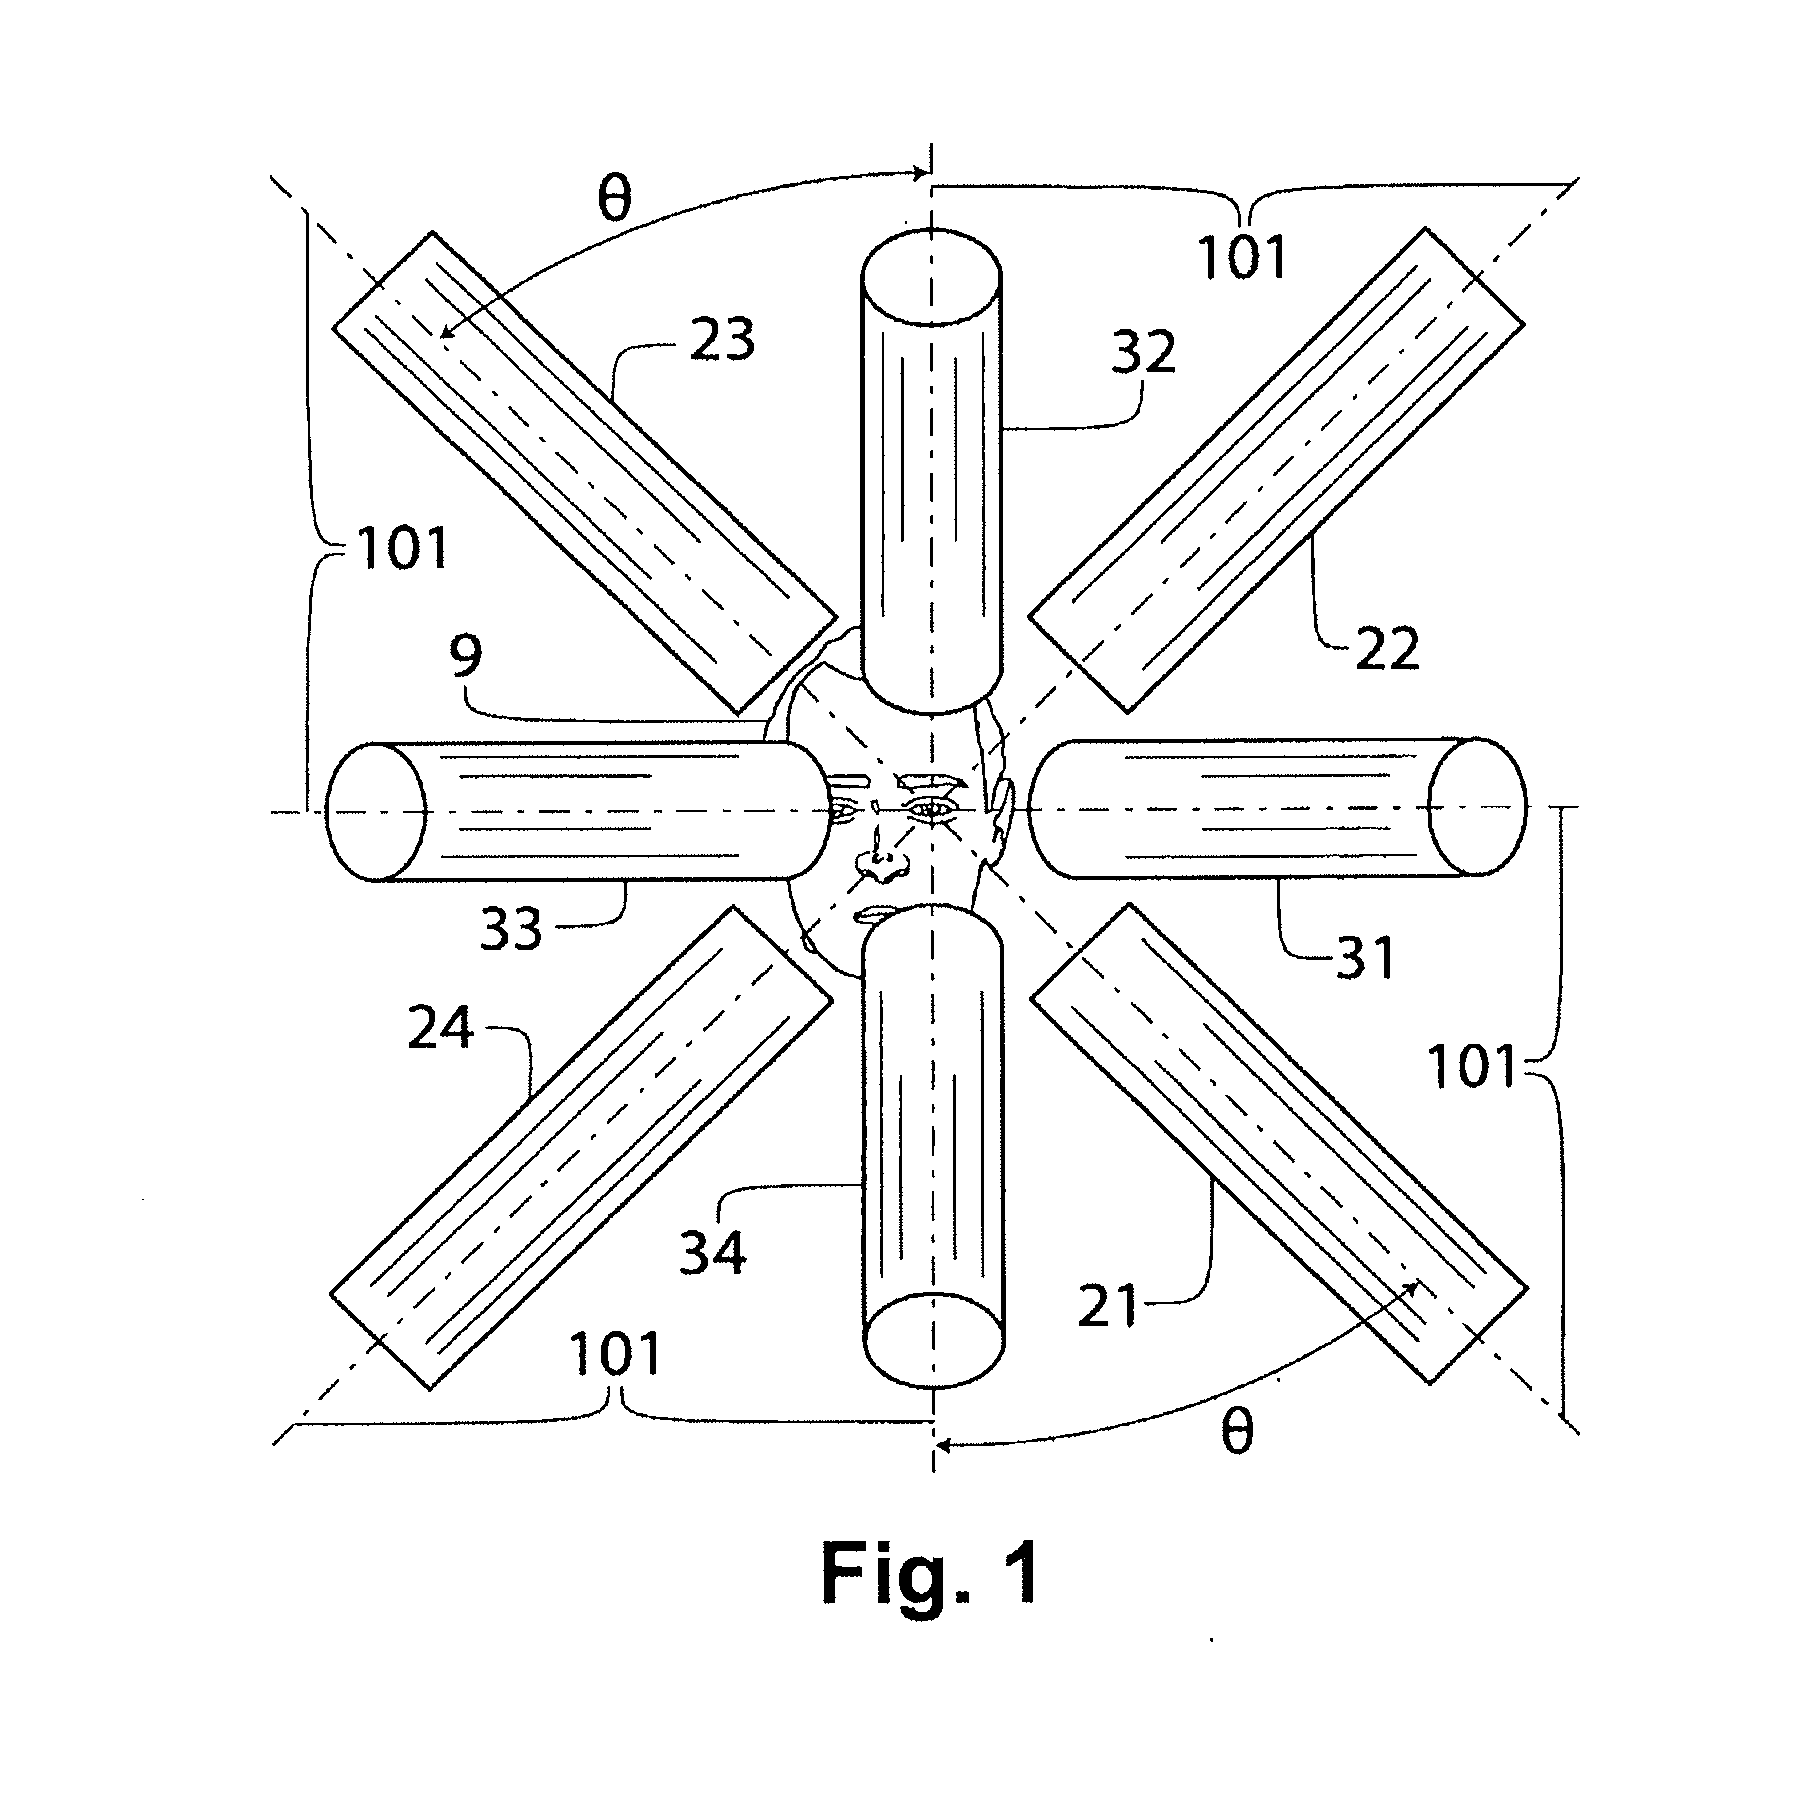 Magnetic navigation system with soft magnetic core electromagnets for operation in the non-linear regime